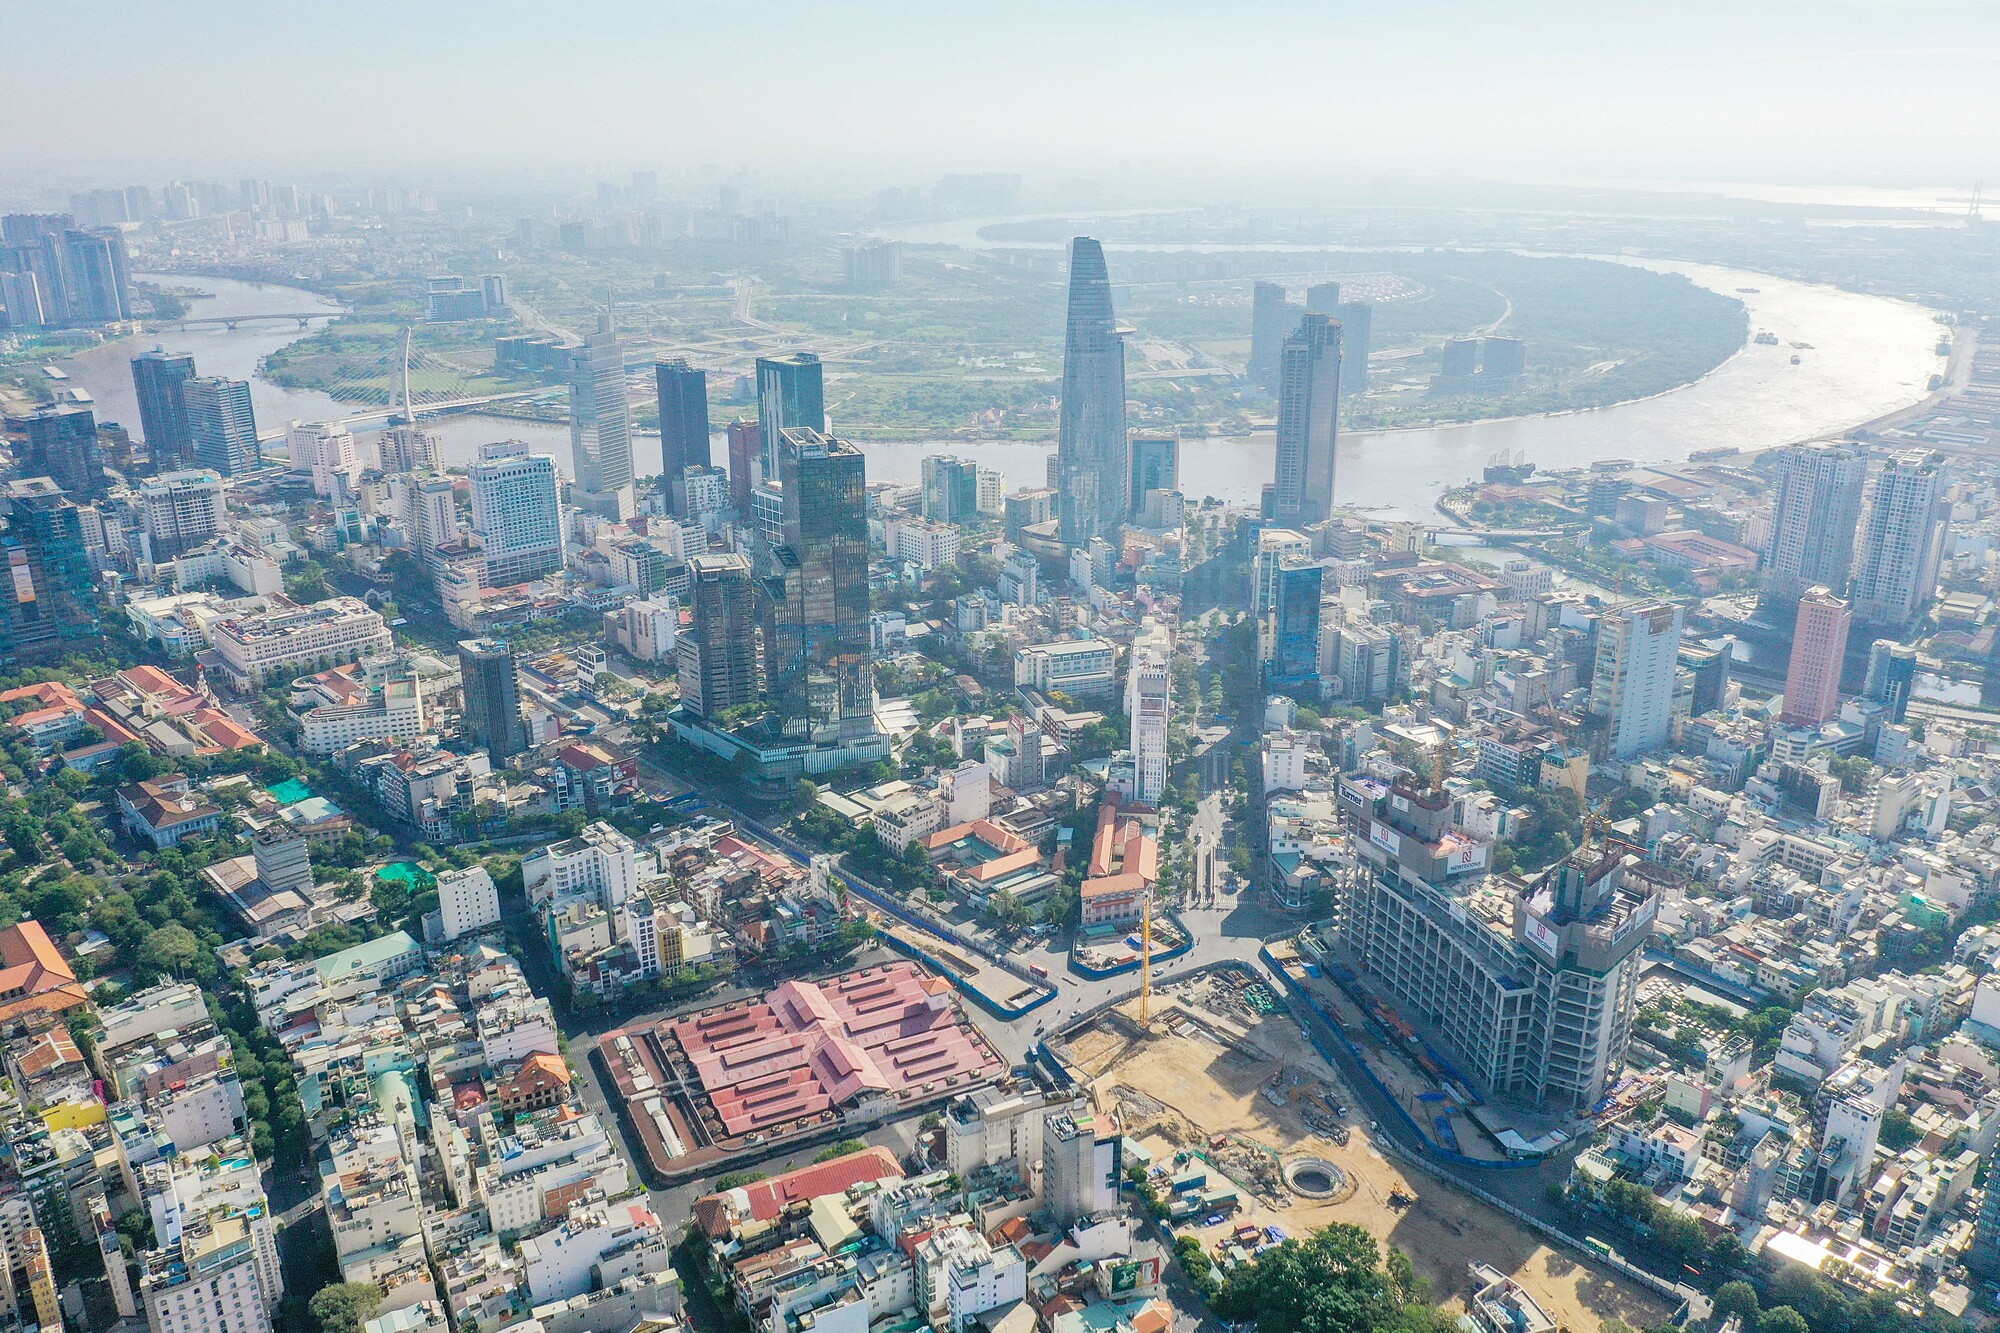 Ho Chi Minh City’s central business district. Photo by VnExpress/Quynh Tran